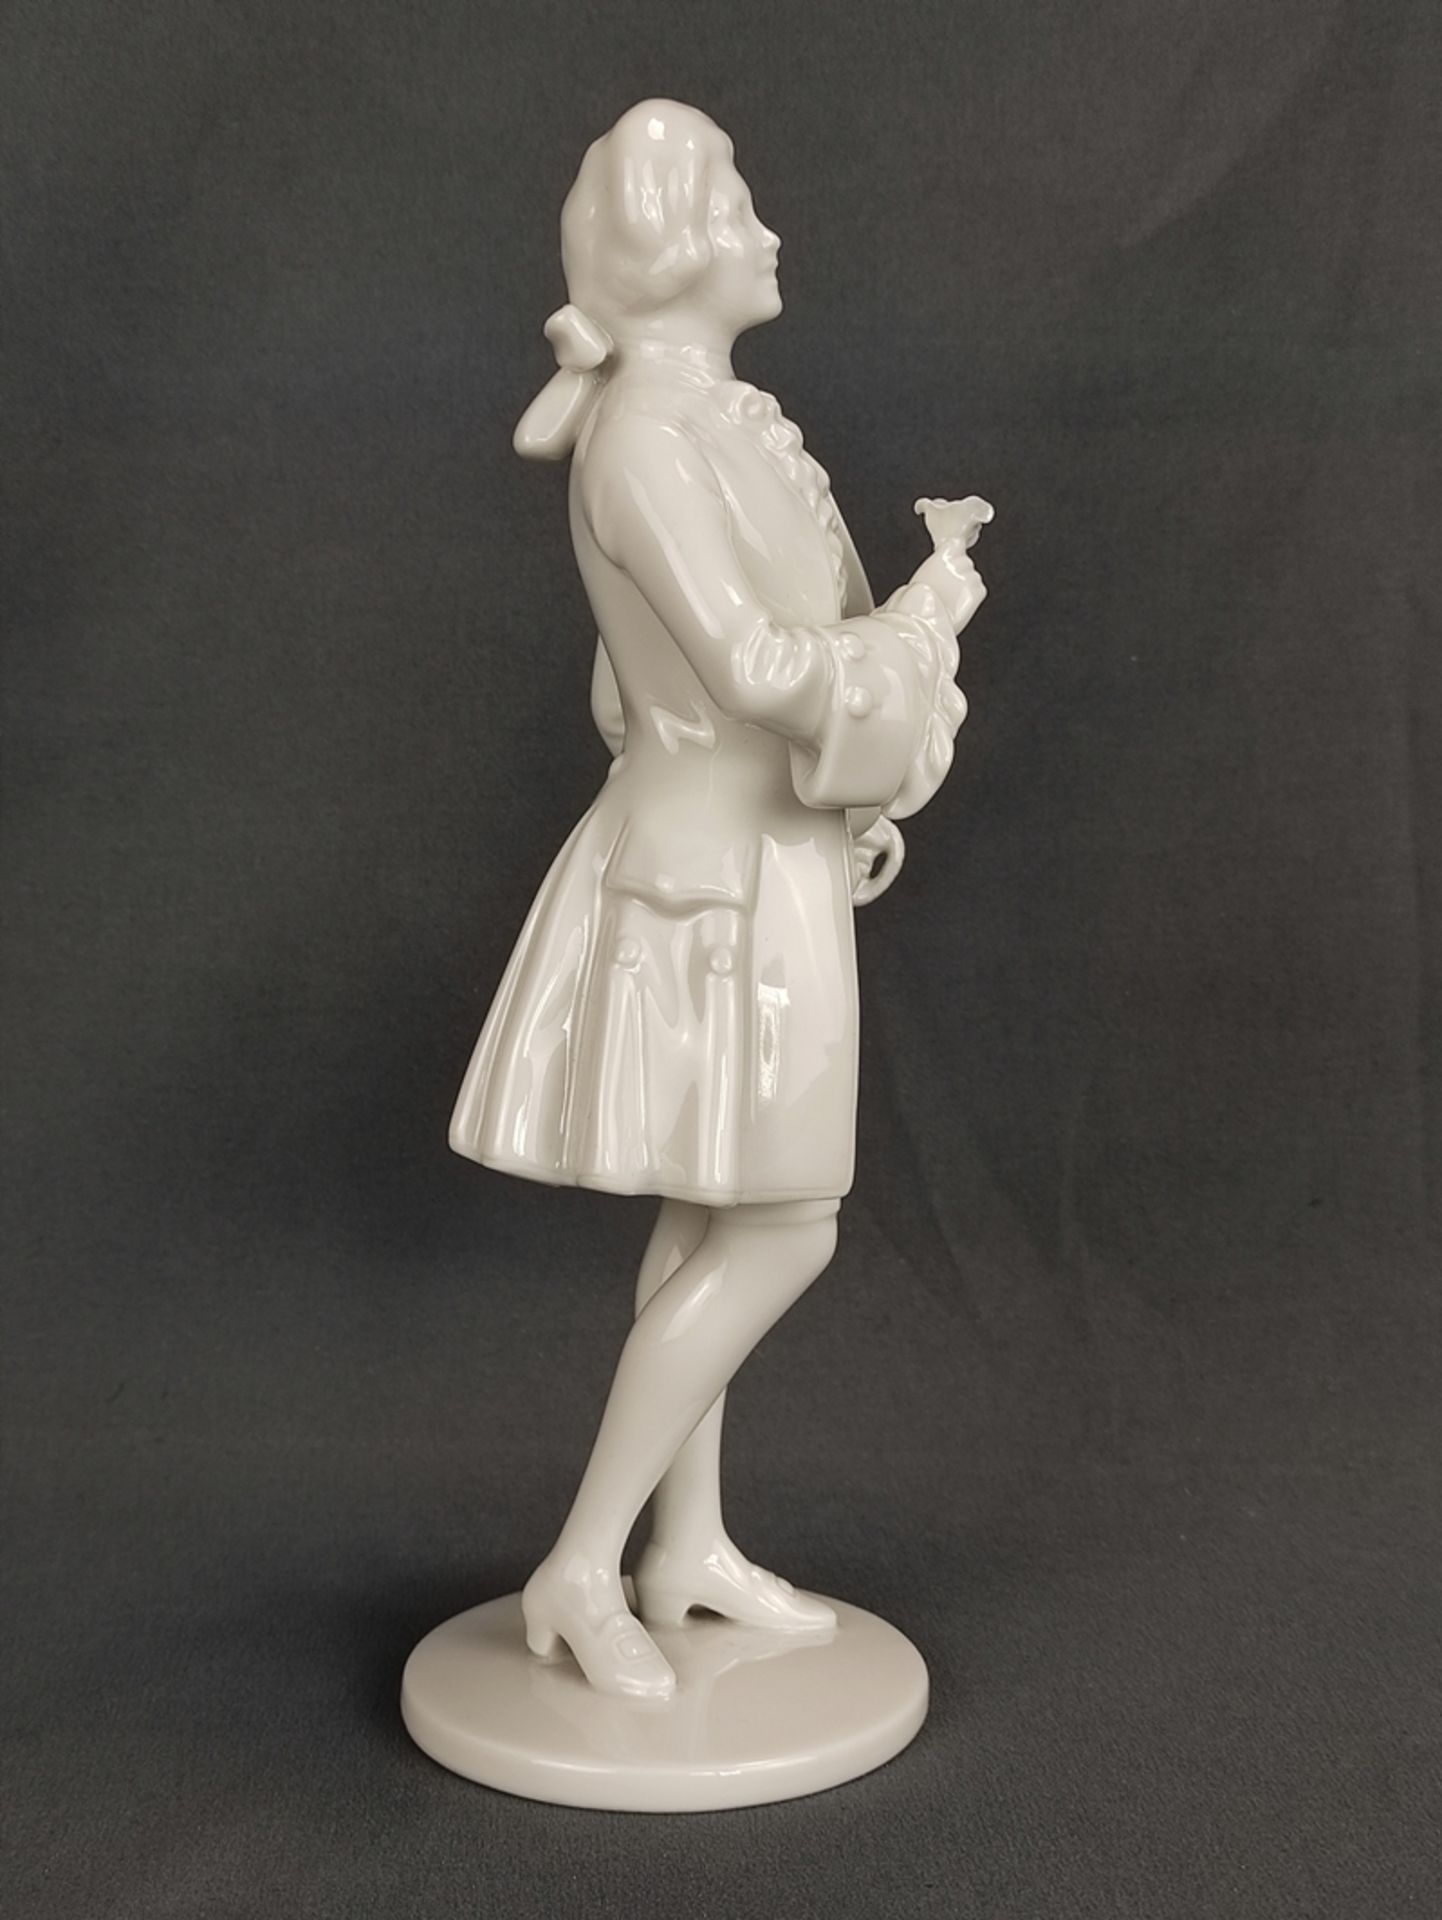 Cavalier, standing on disc stand with rose in hand, white porcelain, Augarten Vienna, embossed mark - Image 4 of 5